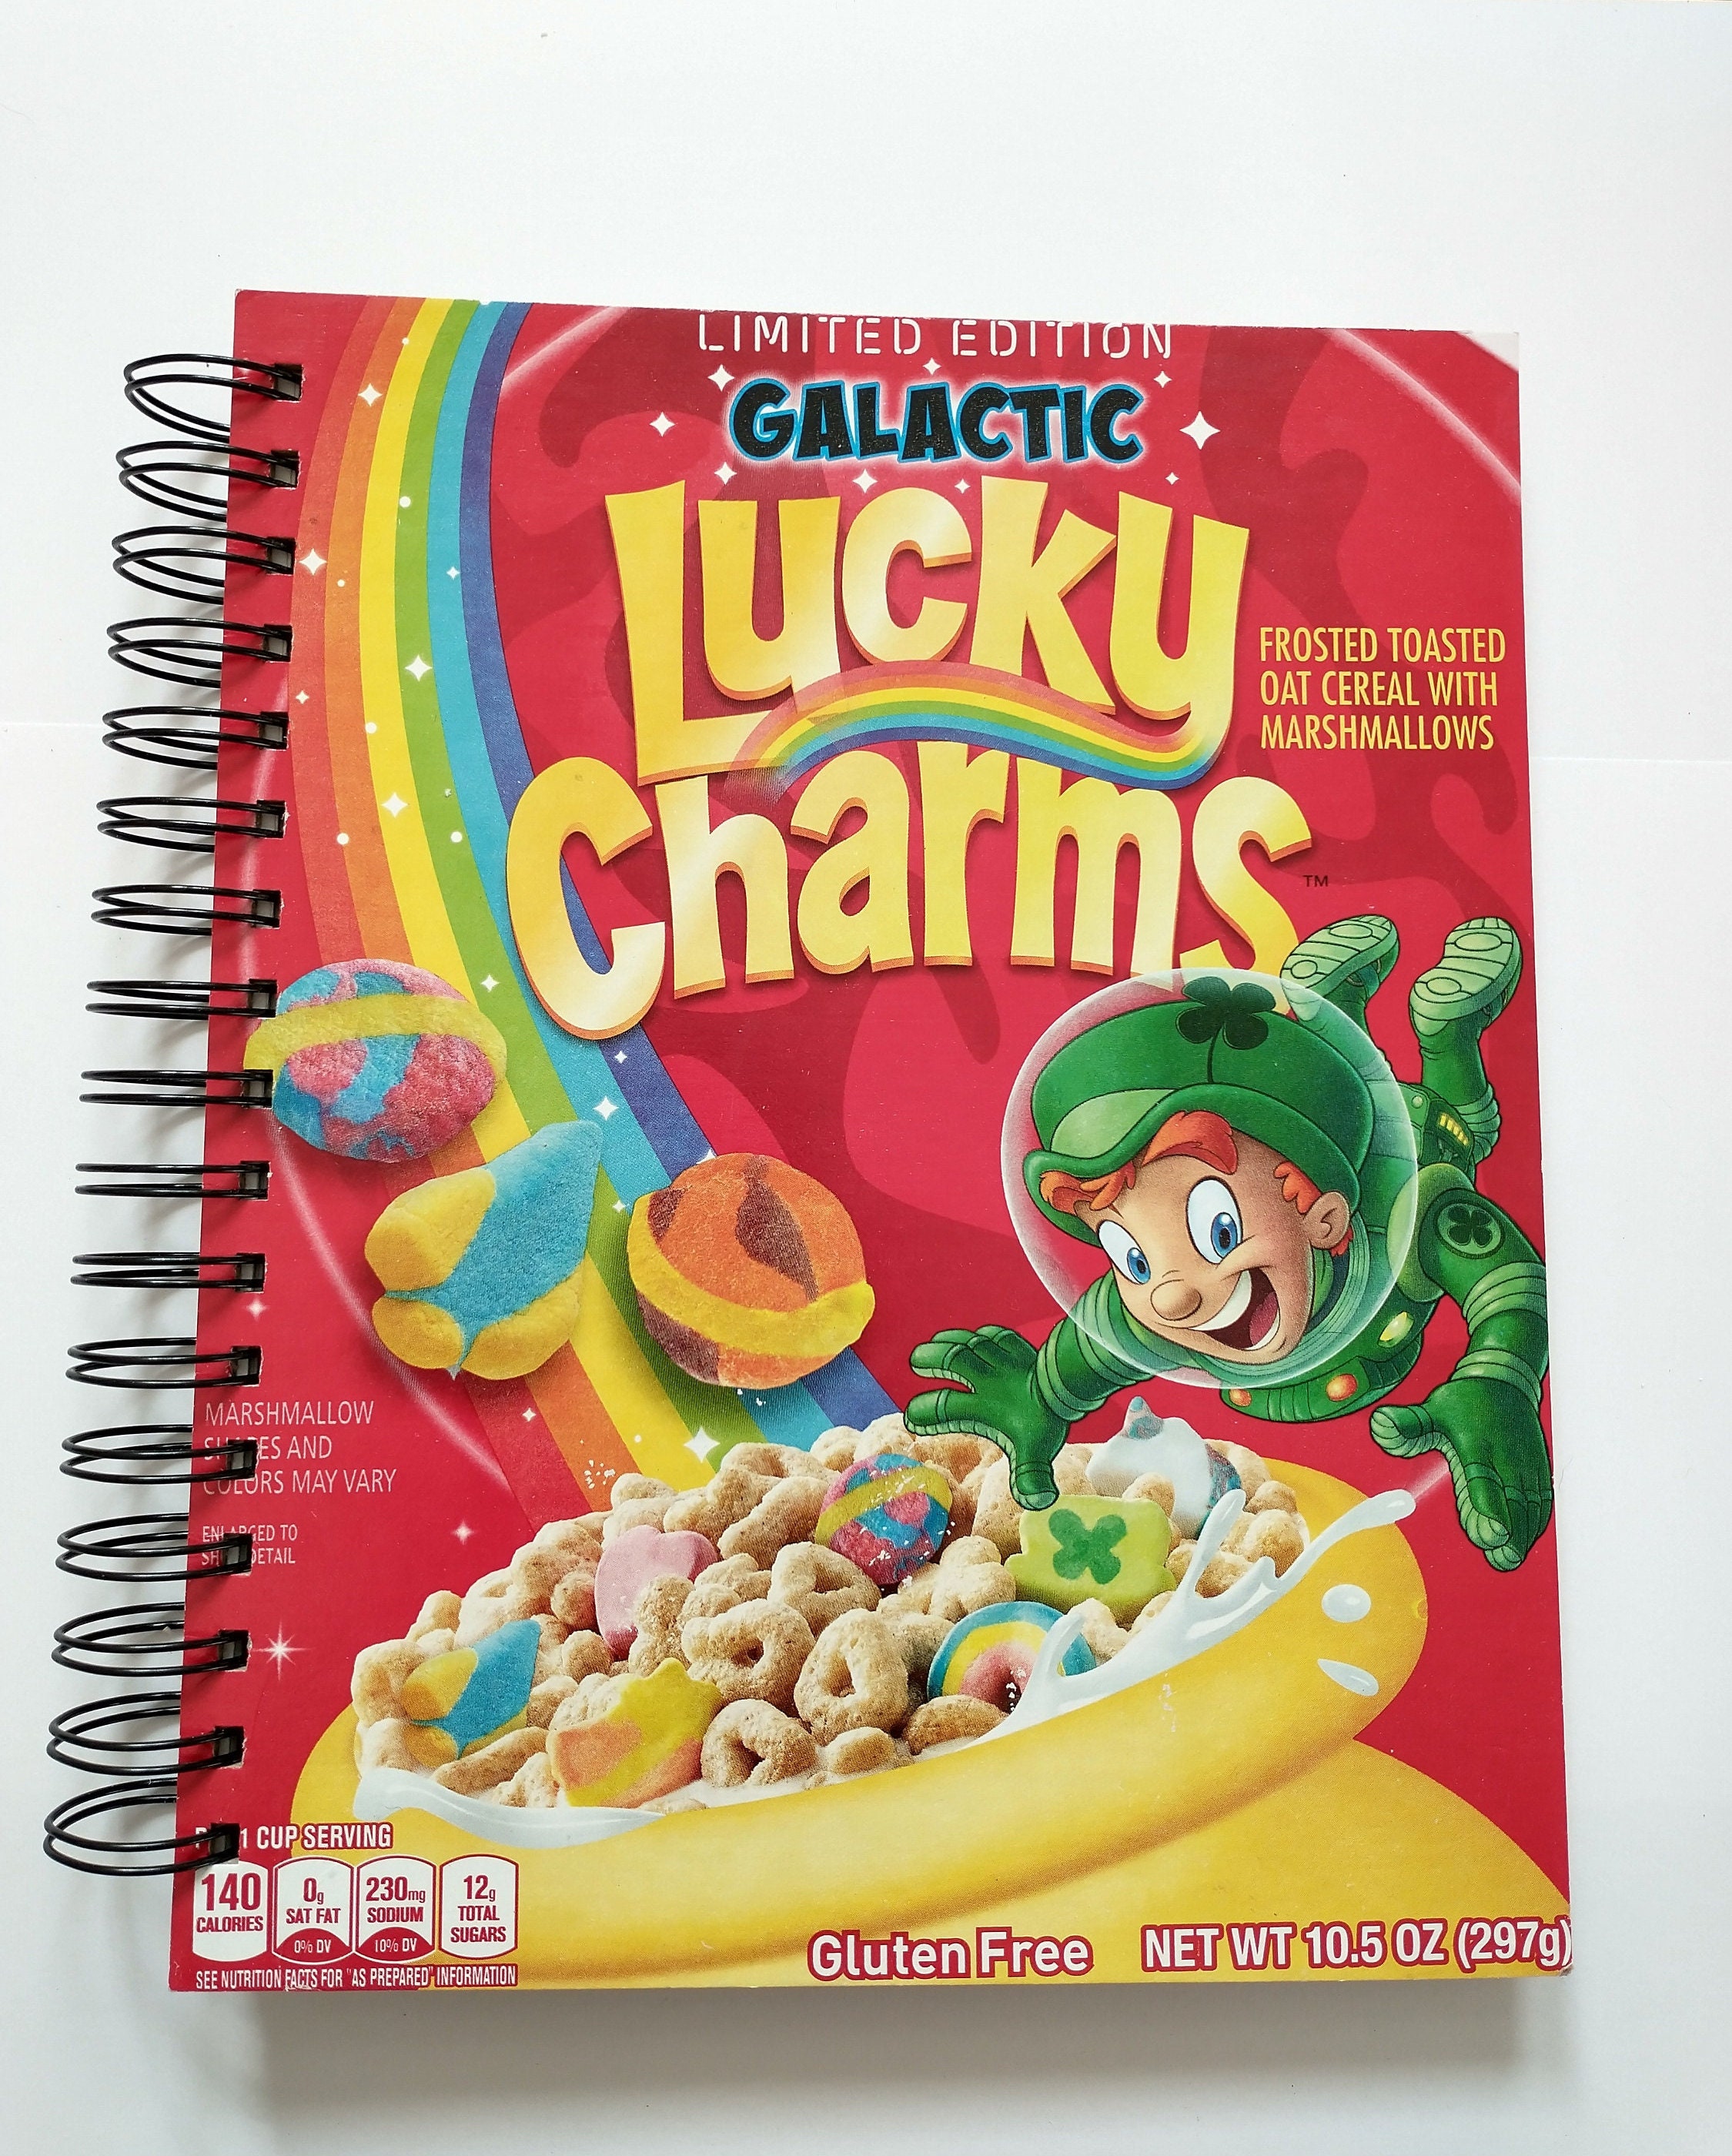 Lucky Charms Gluten Free Cereal with Marshmallows, 10.5 OZ